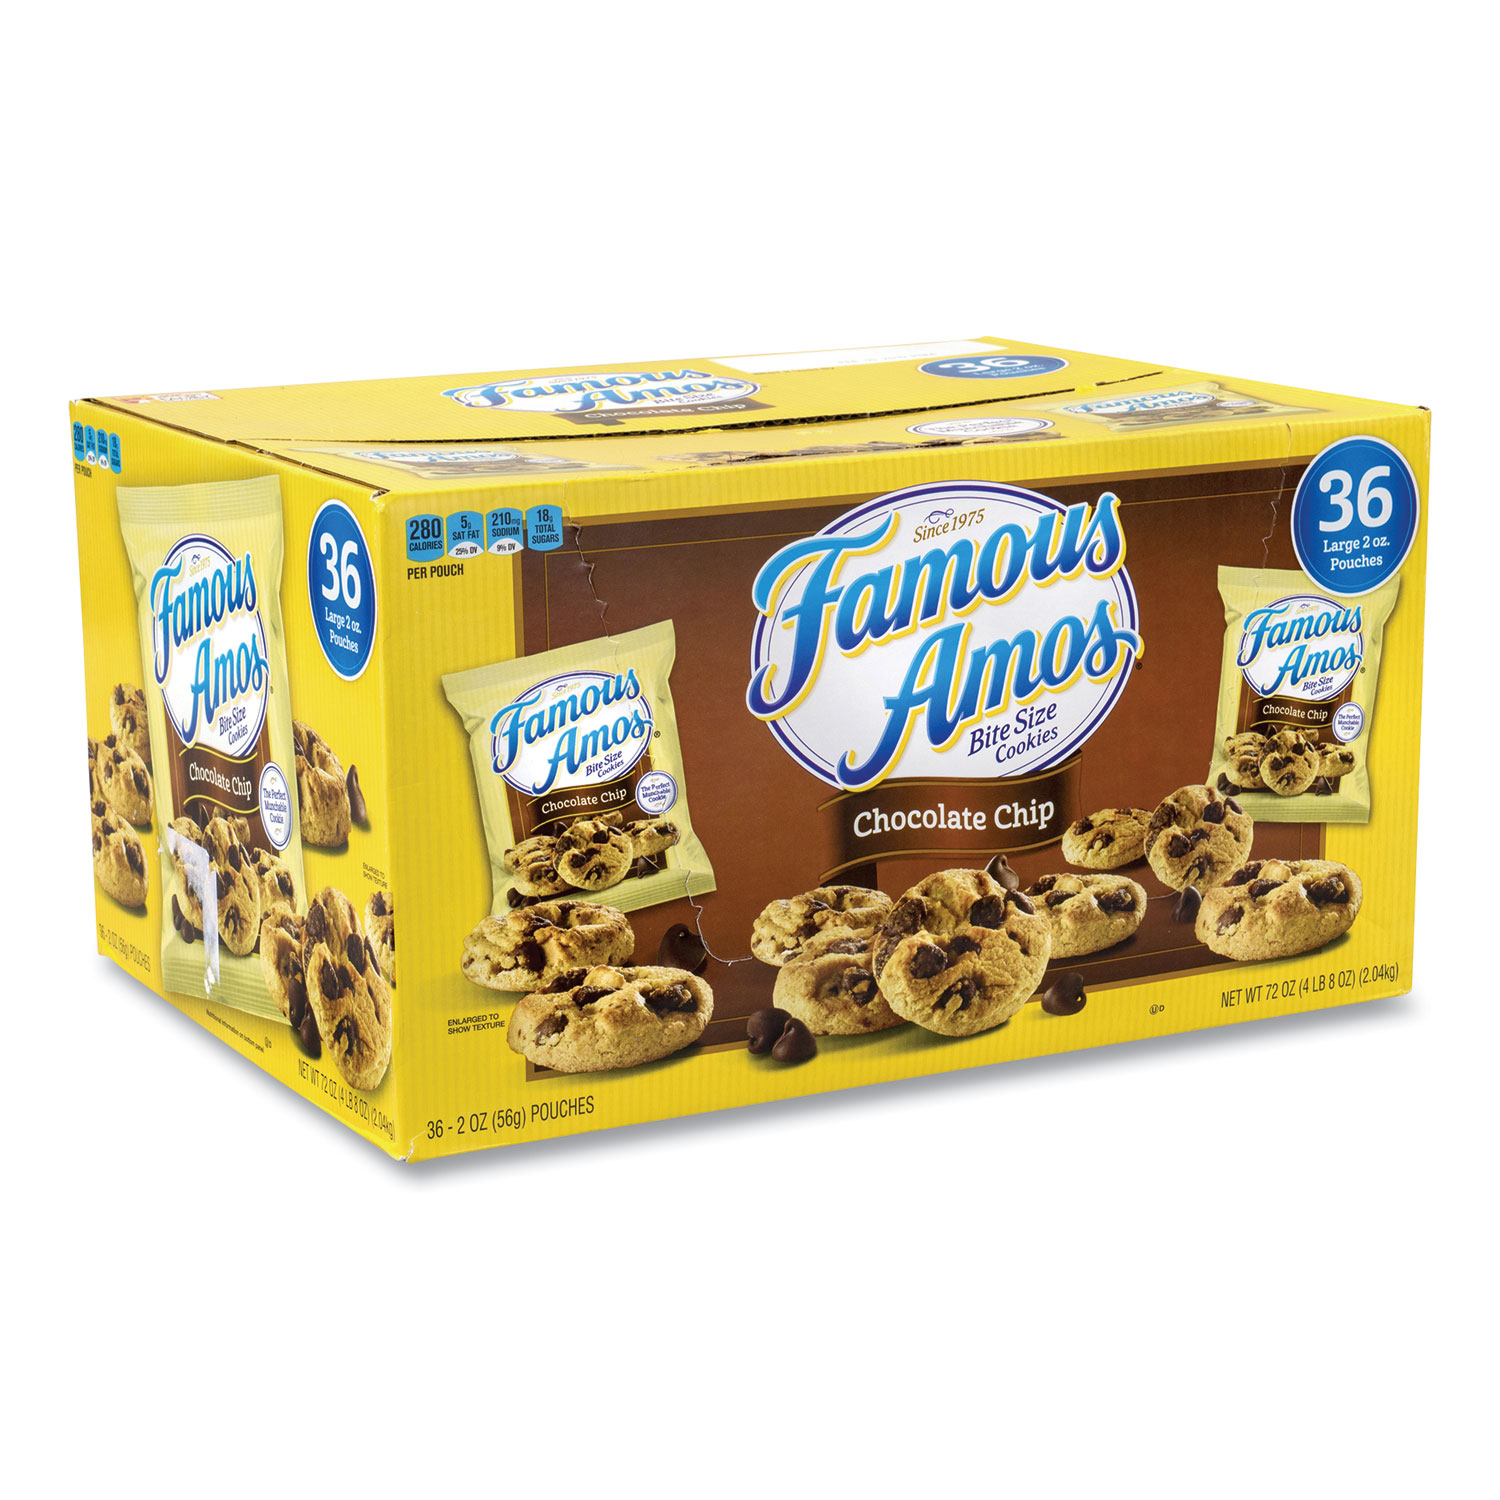  Kellogg's 13205 Famous Amos Cookies, Chocolate Chip, 2 oz Bag, 60/Carton, Free Delivery in 1-4 Business Days (GRR22000424) 